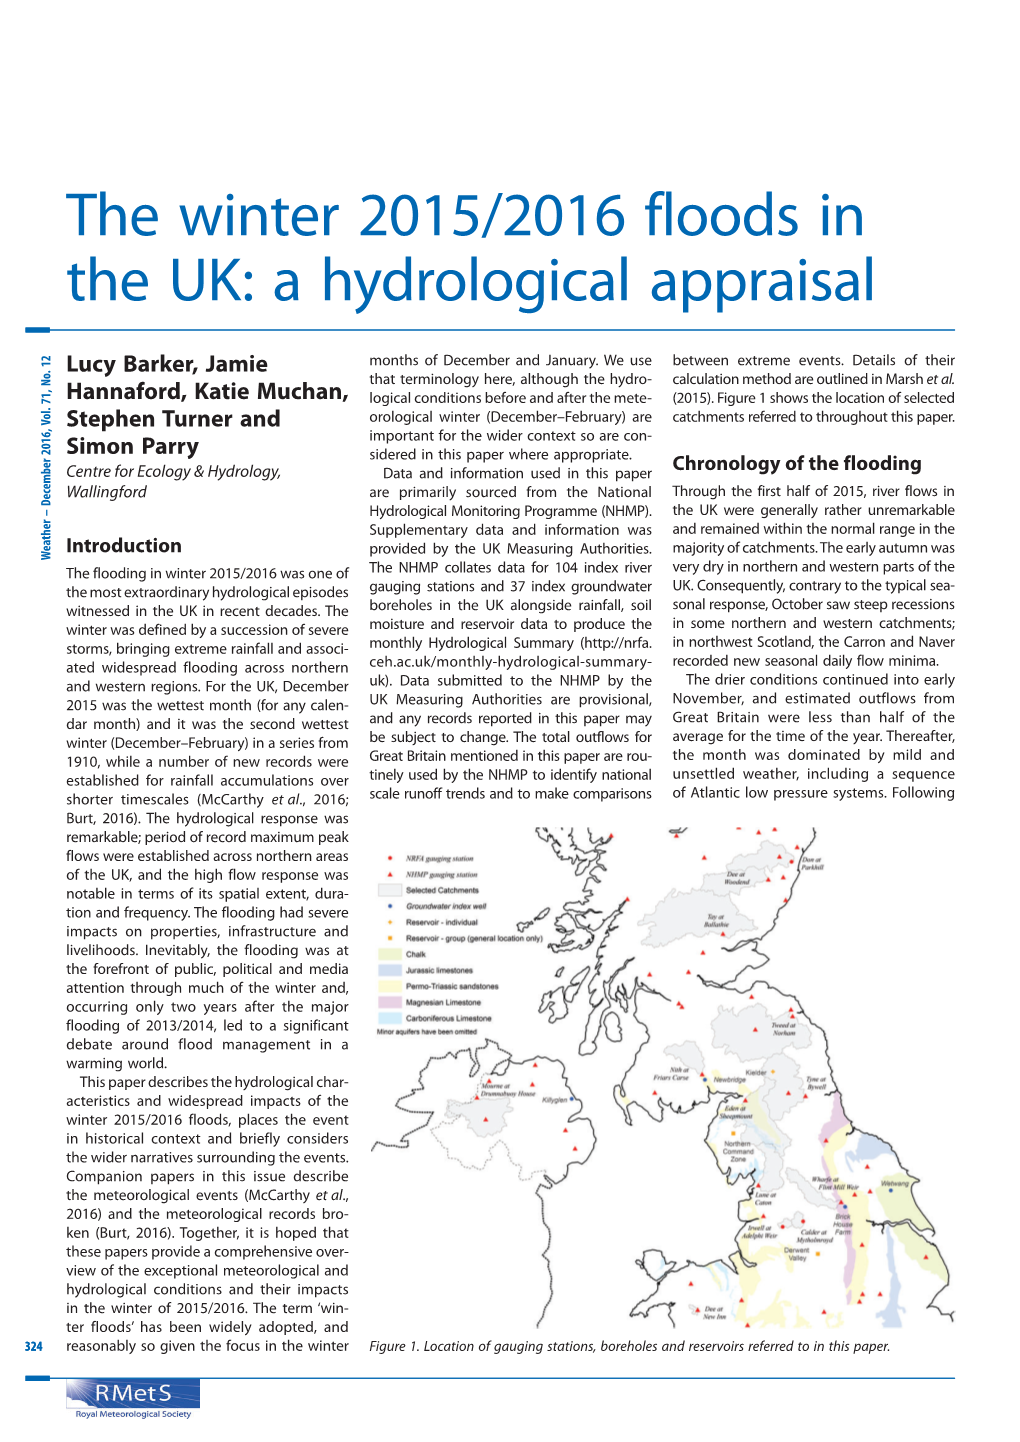 The Winter 2015/2016 Floods in the UK: a Hydrological Appraisal